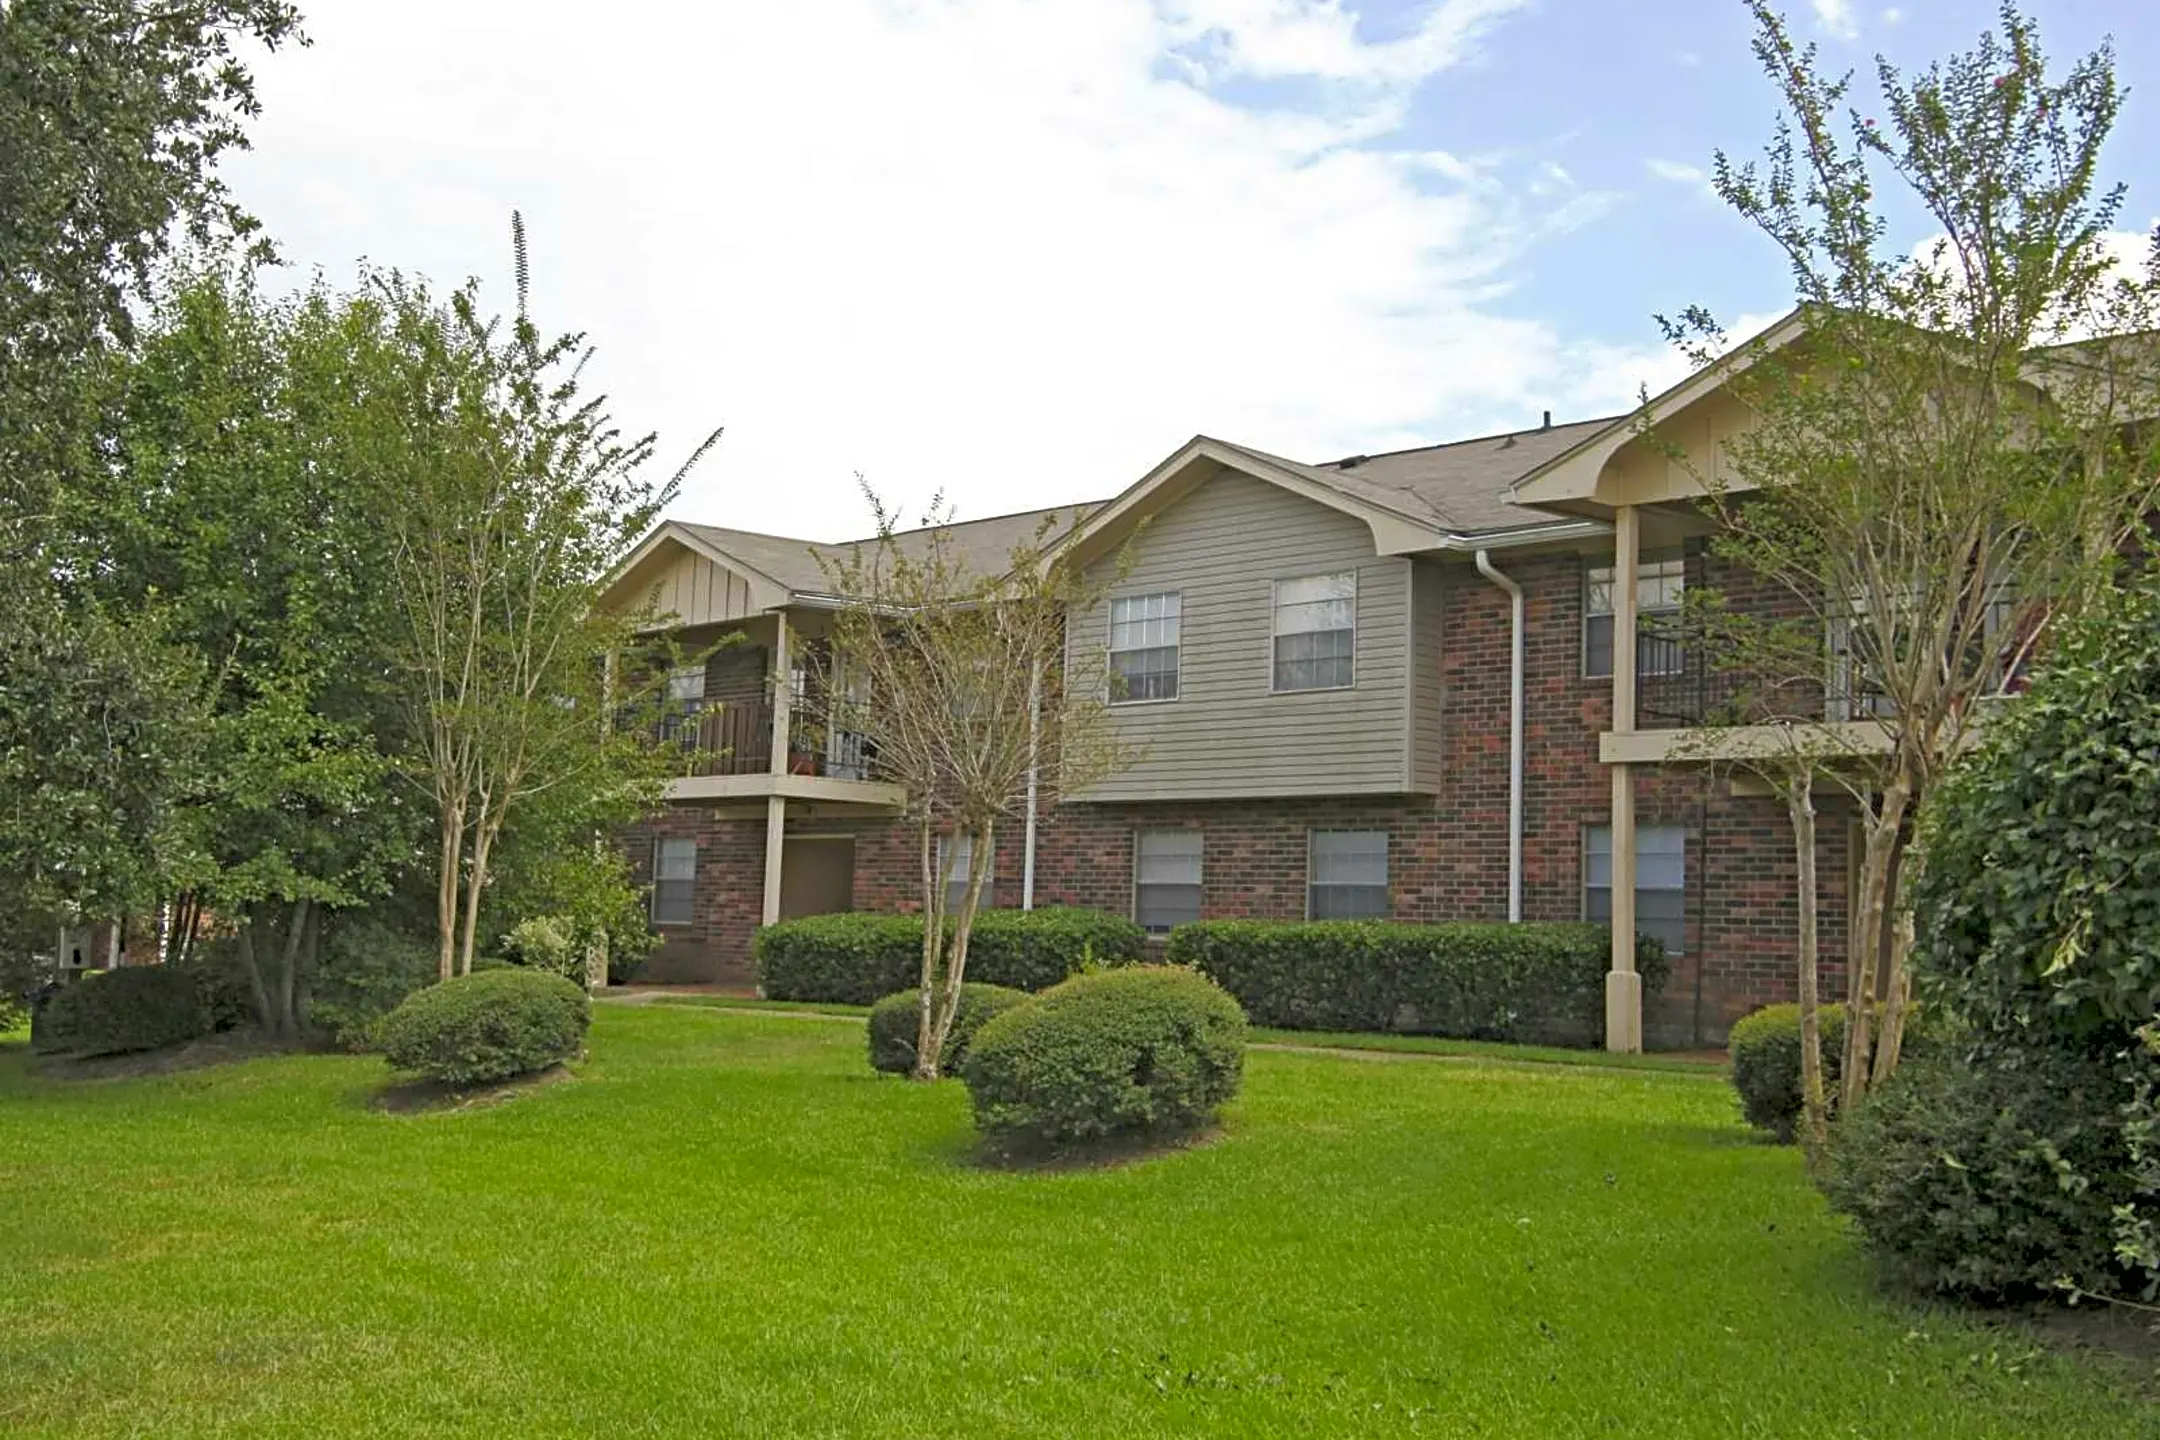 Building - Southern Pines Apartments - Gulfport, MS